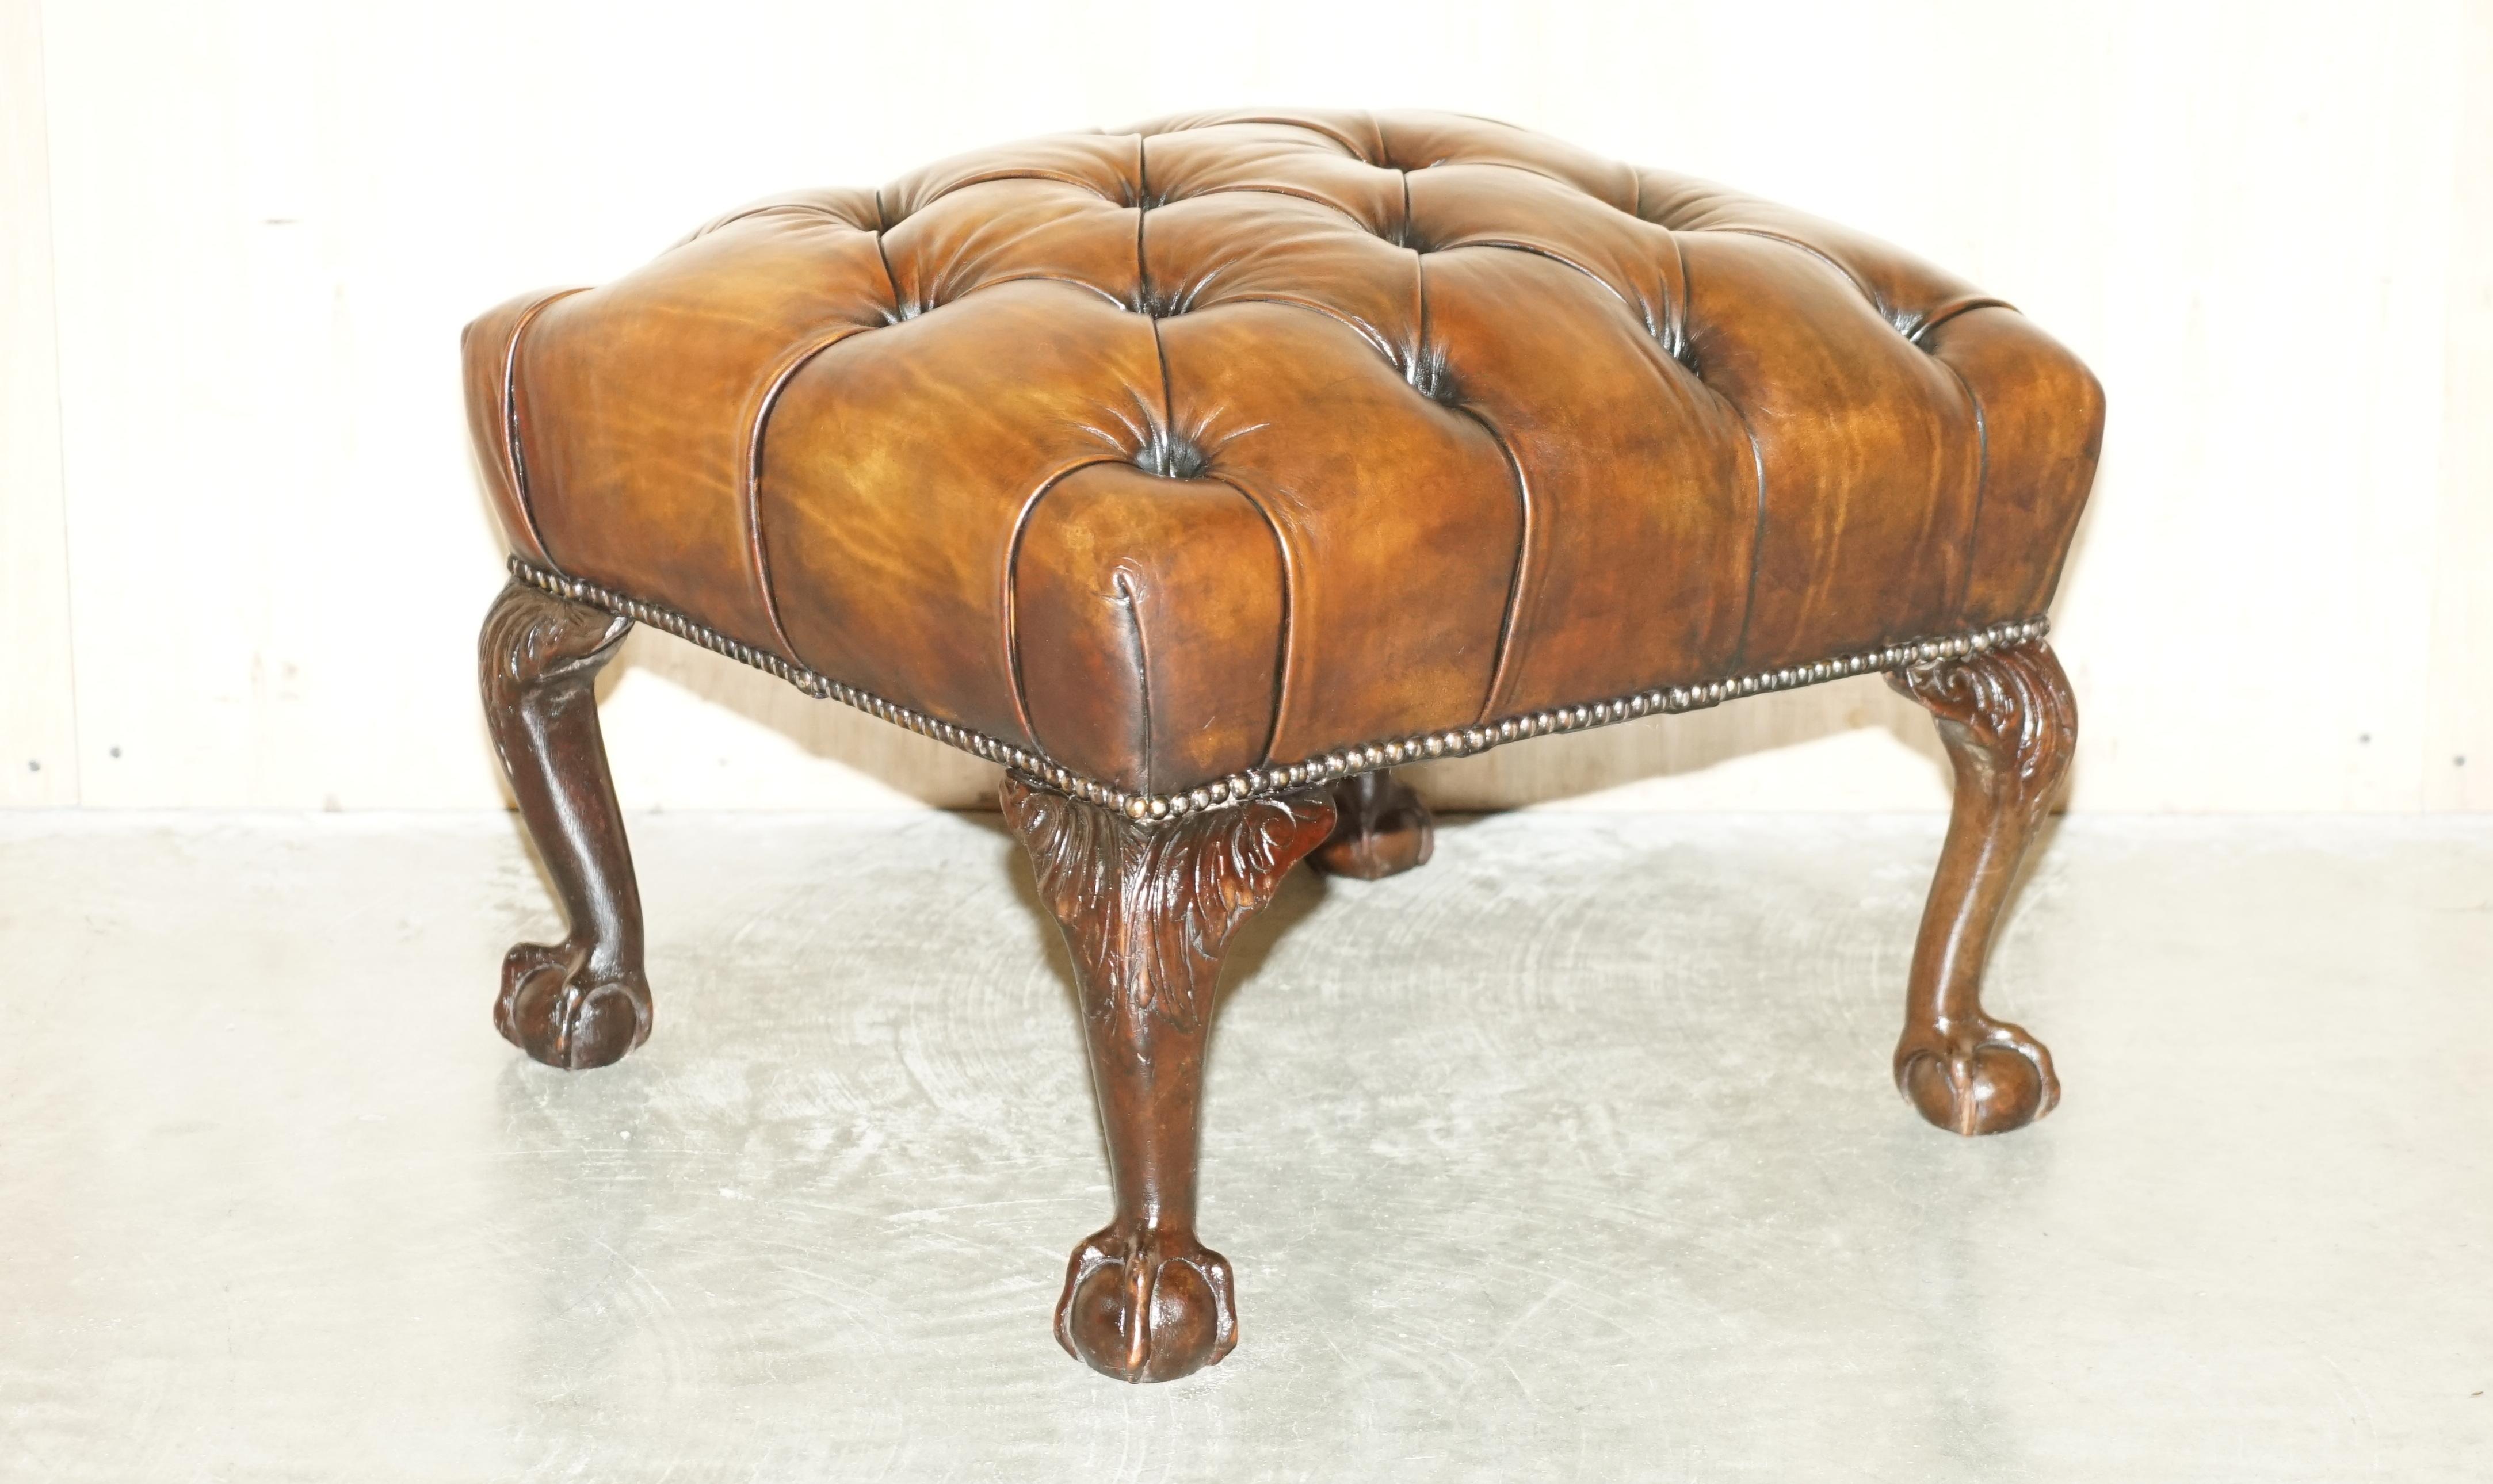 Royal House Antiques

Royal House Antiques is delighted to offer for sale this absolutely stunning fully restored hand dyed cigar brown leather Victorian Chesterfield footstool with ornated hand carved Claw & Ball feet

Please note the delivery fee